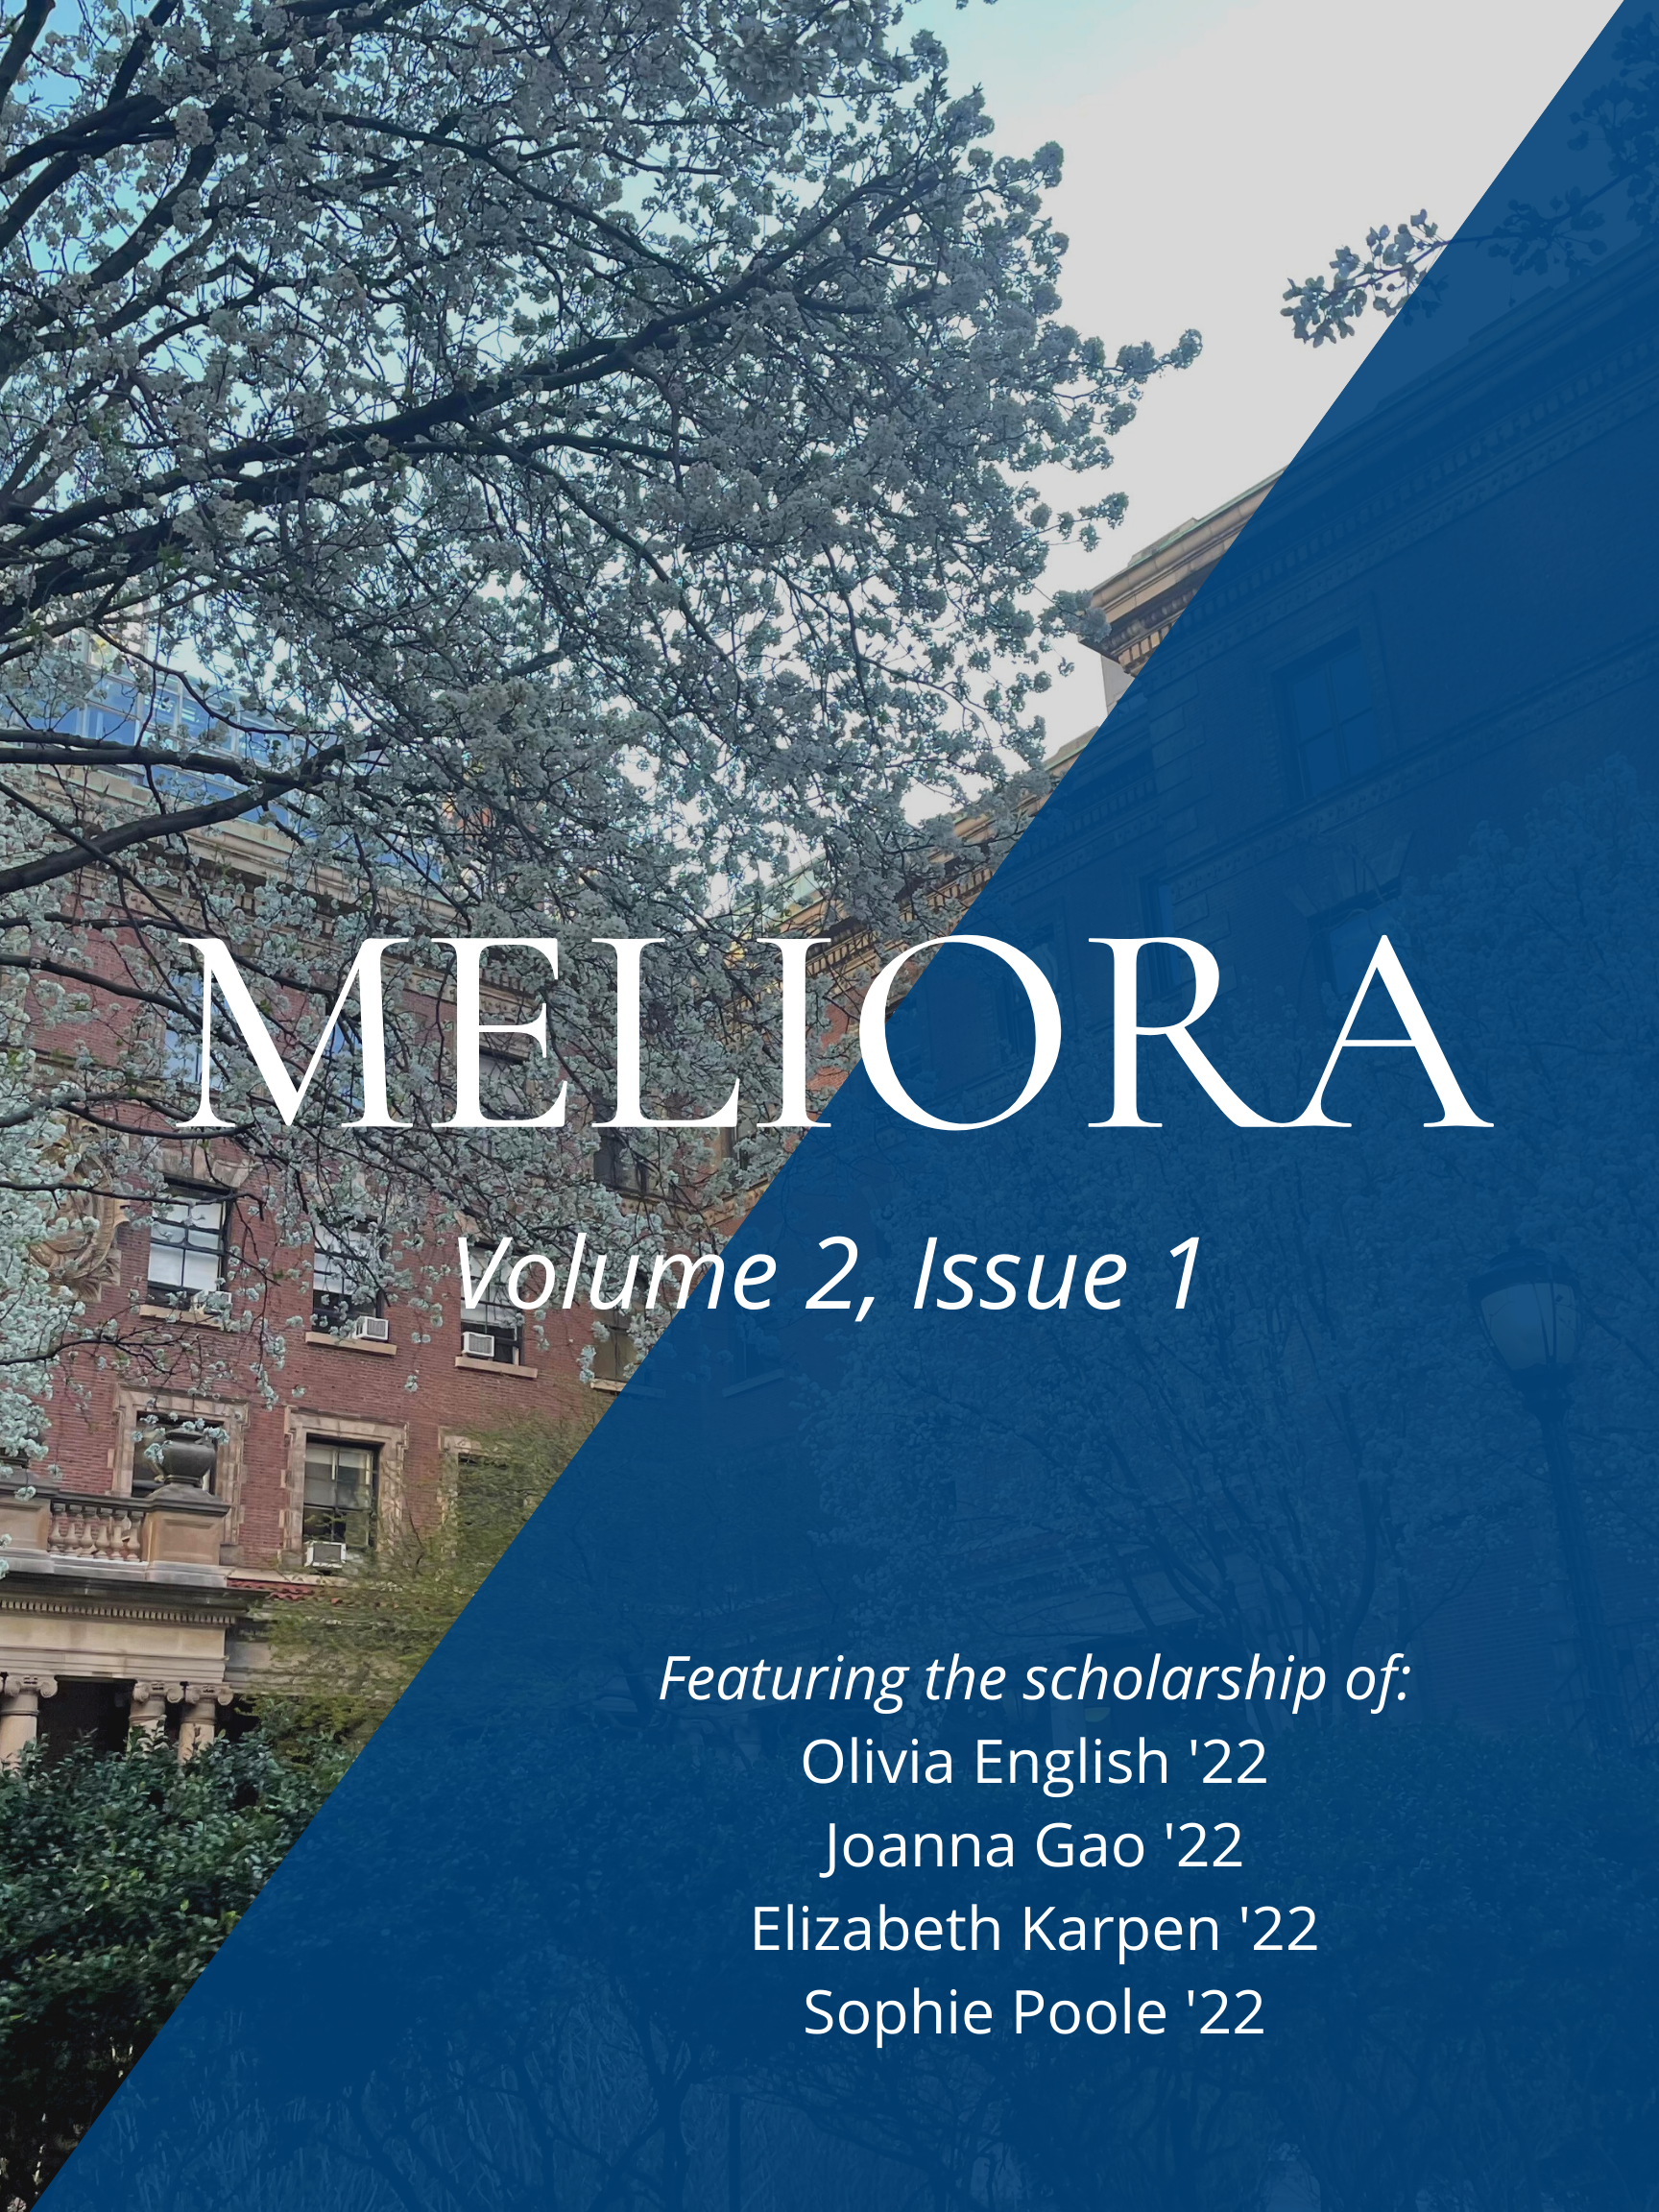 Meliora Volume 2, issue 1. Featuring the Scholarship of Olivia English '22, Joanna Gao '22, Elizabeth Karpen '22, and Sophie Poole '22. The cover image background is Barnard College's Milbank Hall.